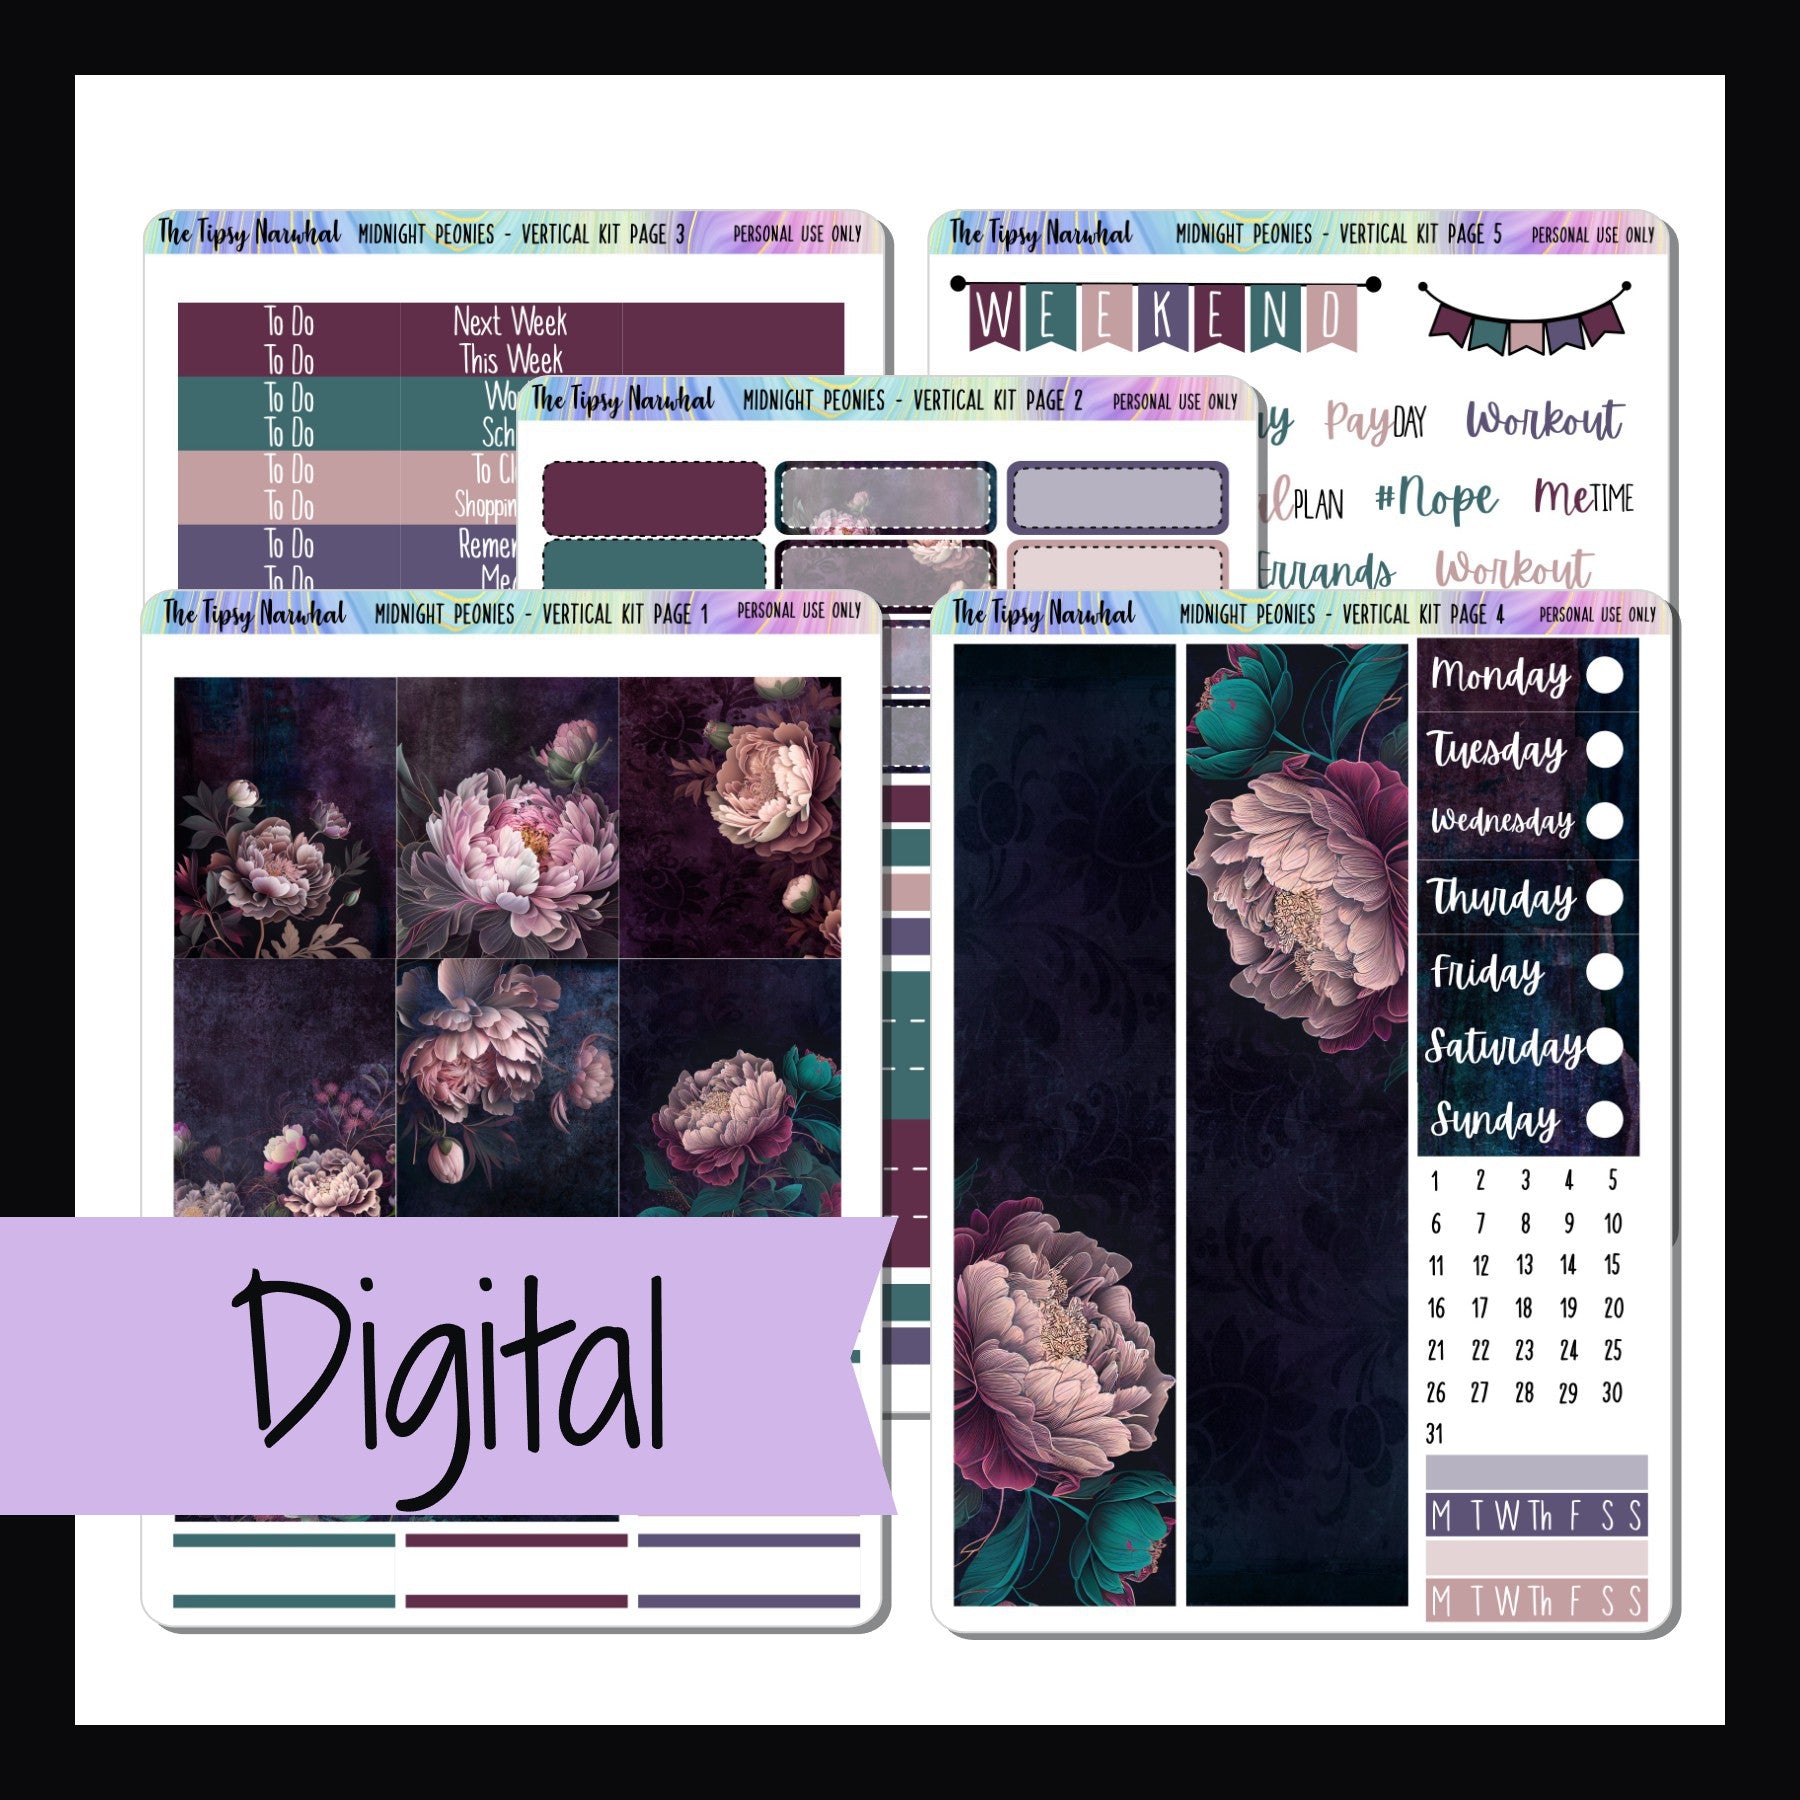 Digital Midnight Peonies Vertical kit is a digital/printable version of the Midnight Peonies sticker kit.  It is a 5 page sticker kit sized to fit popular vertical style planner layouts.  Features a variety of pink peonies on dramatically dark backgrounds.